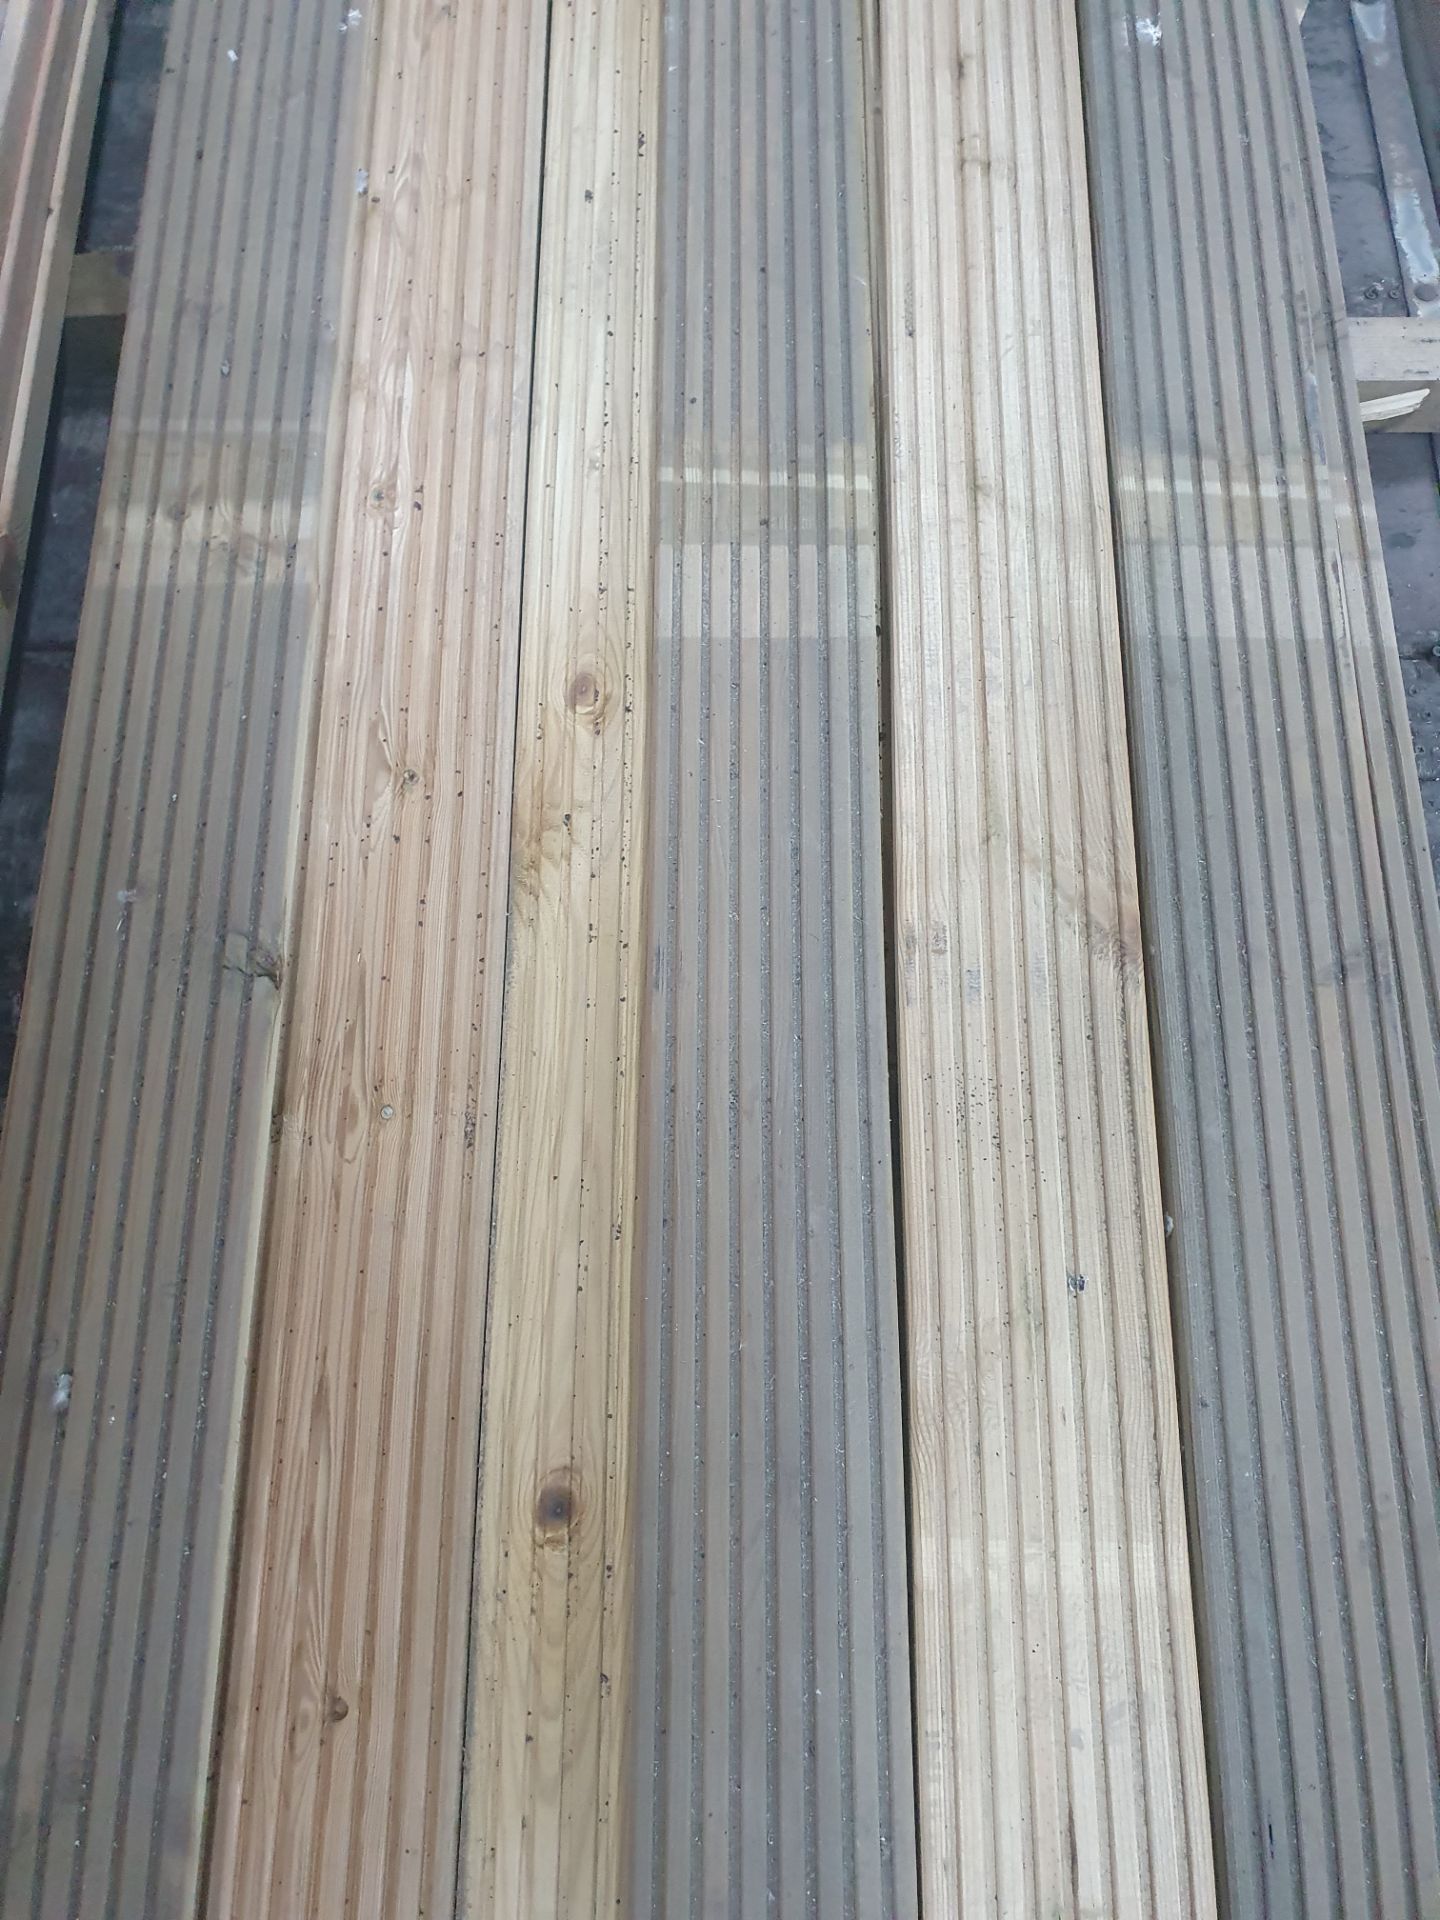 55 x Lengths of Decking | Size: (L) 420cm x (W) 14cm x (H) 3cm - Image 5 of 6